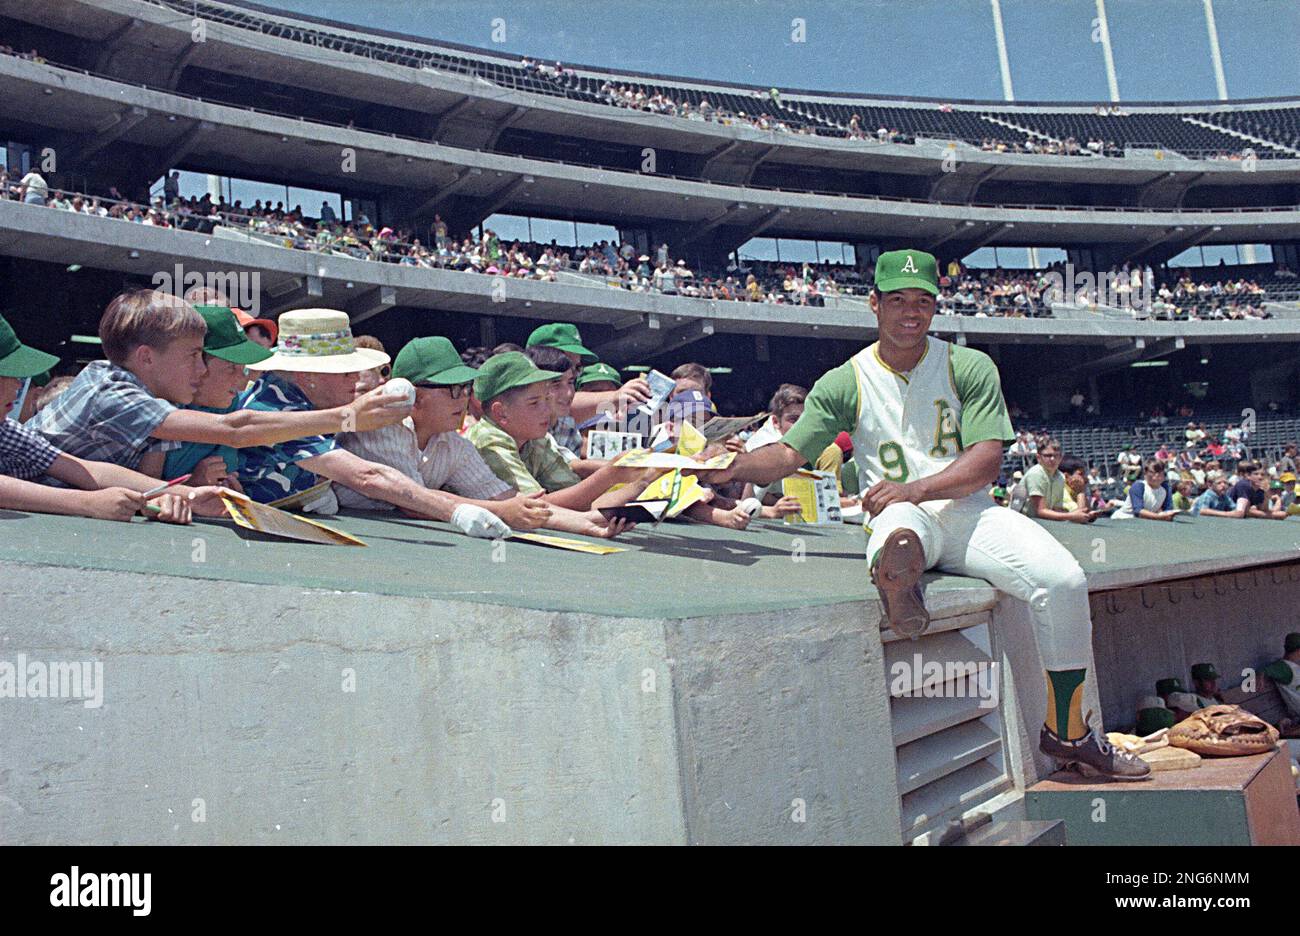 Oakland Athletics' player Reggie Jackson is shown with fans in